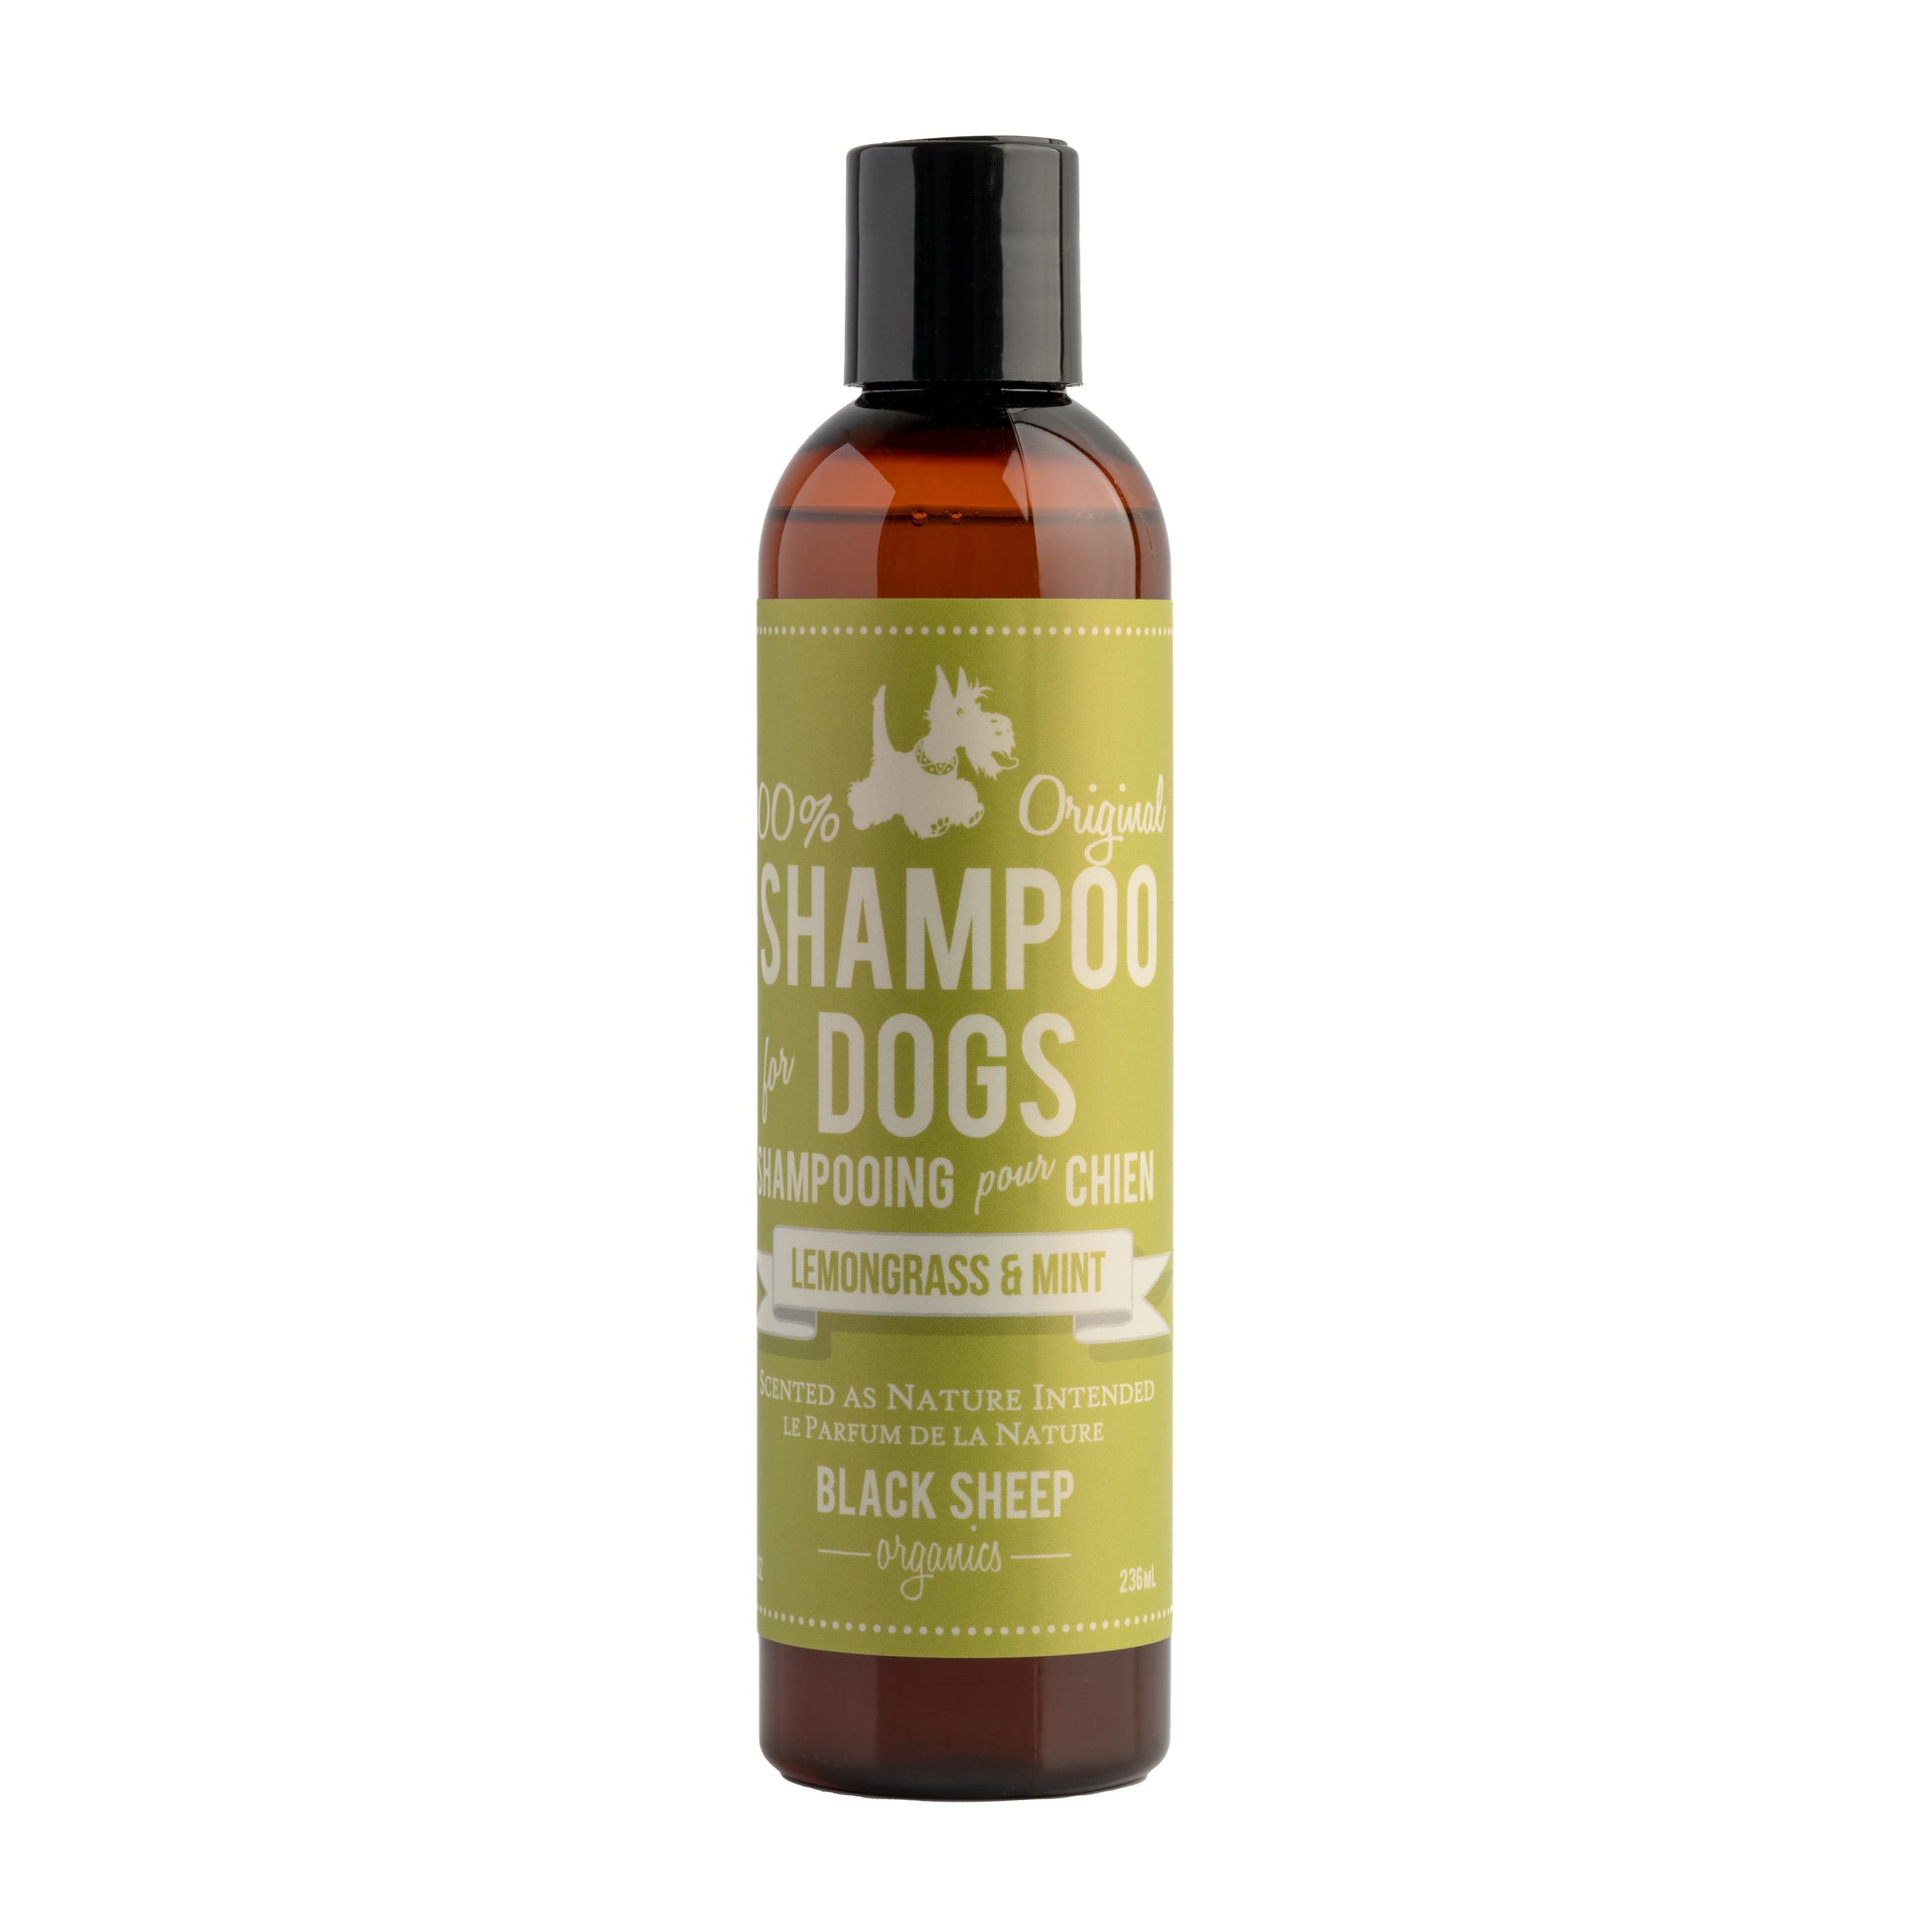 A lemongrass & mint organic dog shampoo that refreshes itchy skin of active dogs.